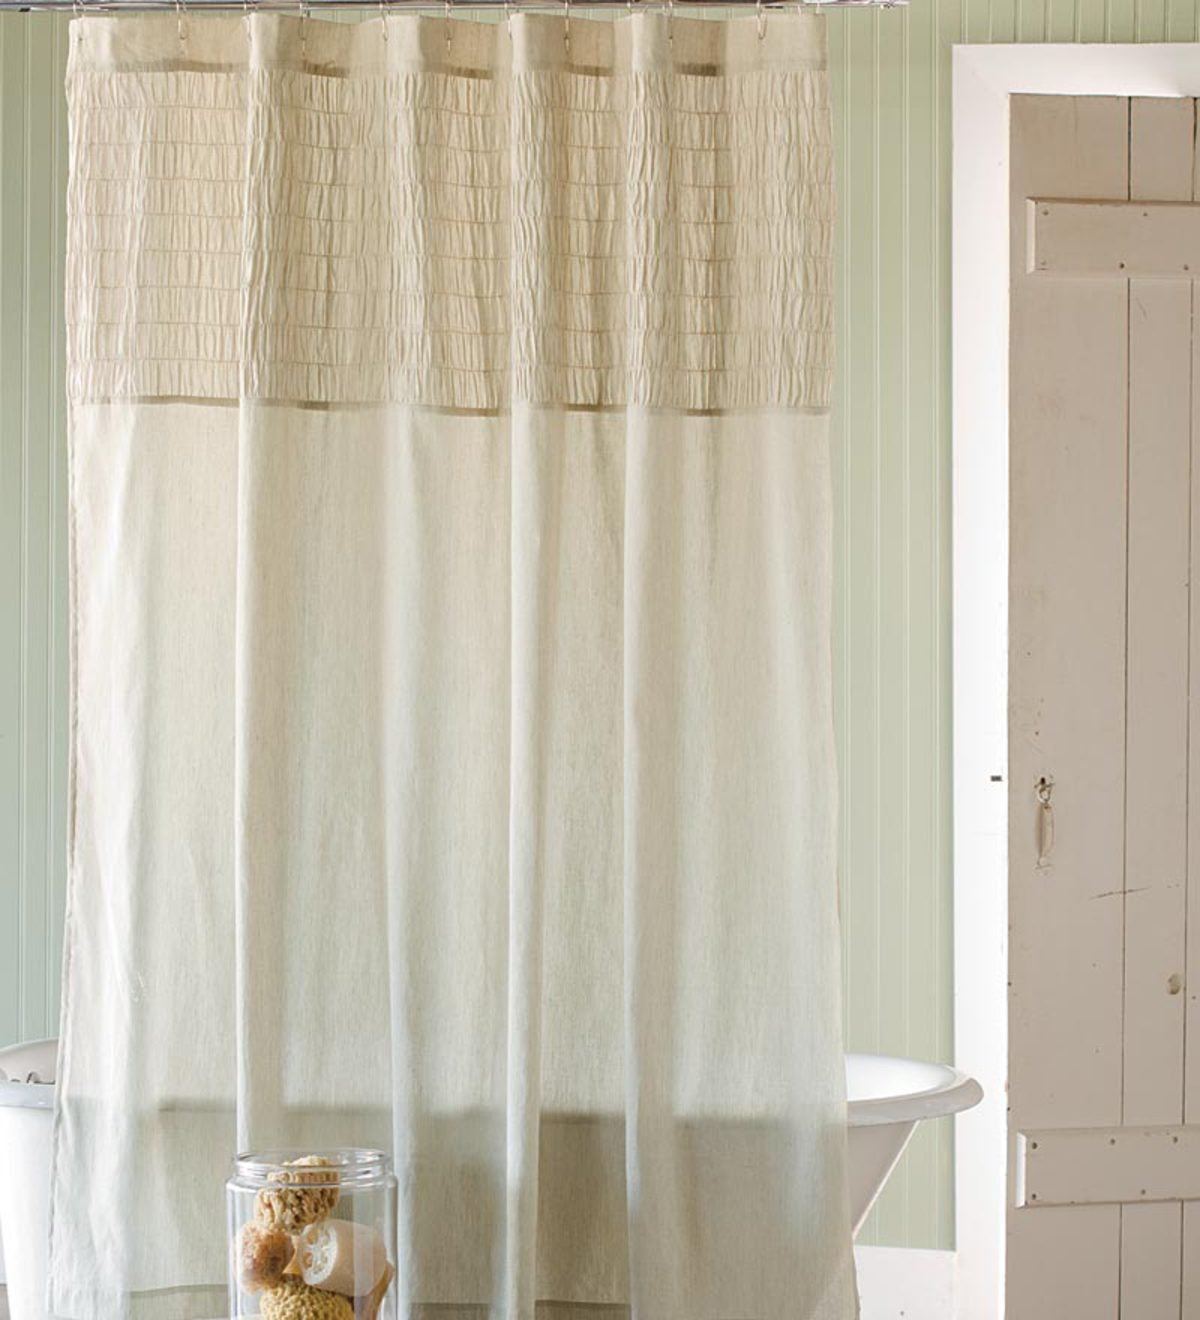 Ruched Linen Shower Curtain Plowhearth, Sheer Top Shower Curtain